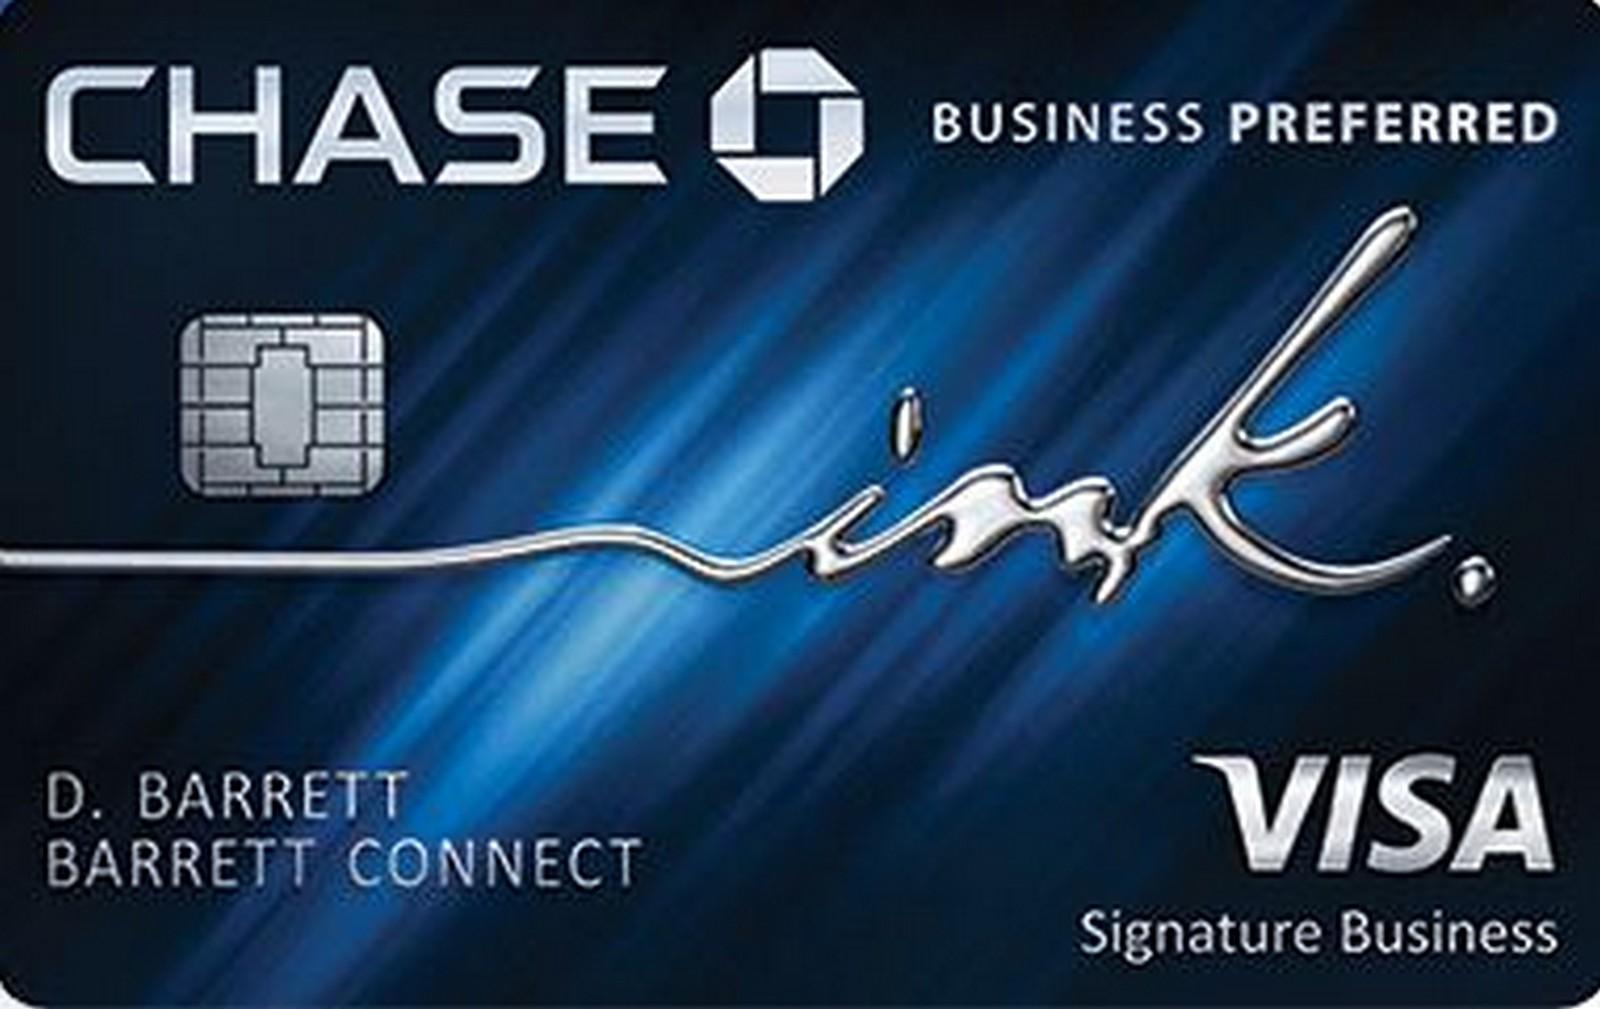 100K Offer for Chase Ink Business Preferred